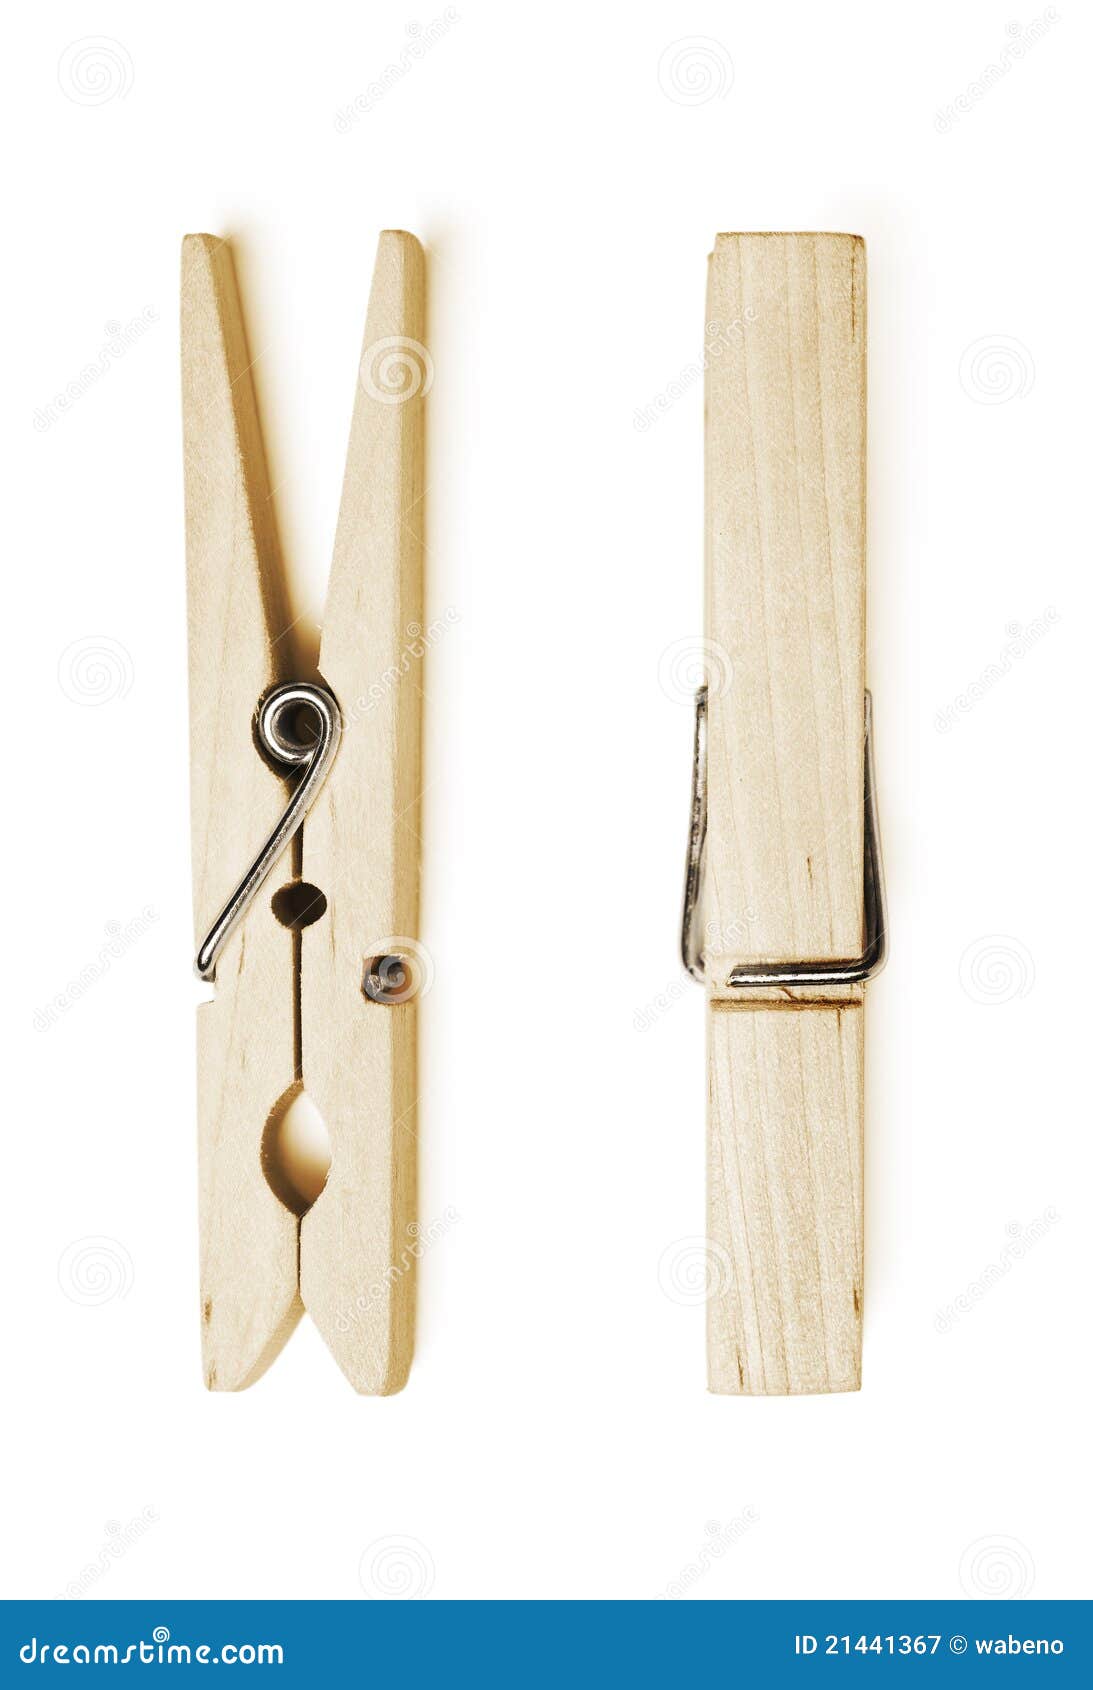 Wooden clothespin stock image. Image of copy, closeup - 21441367